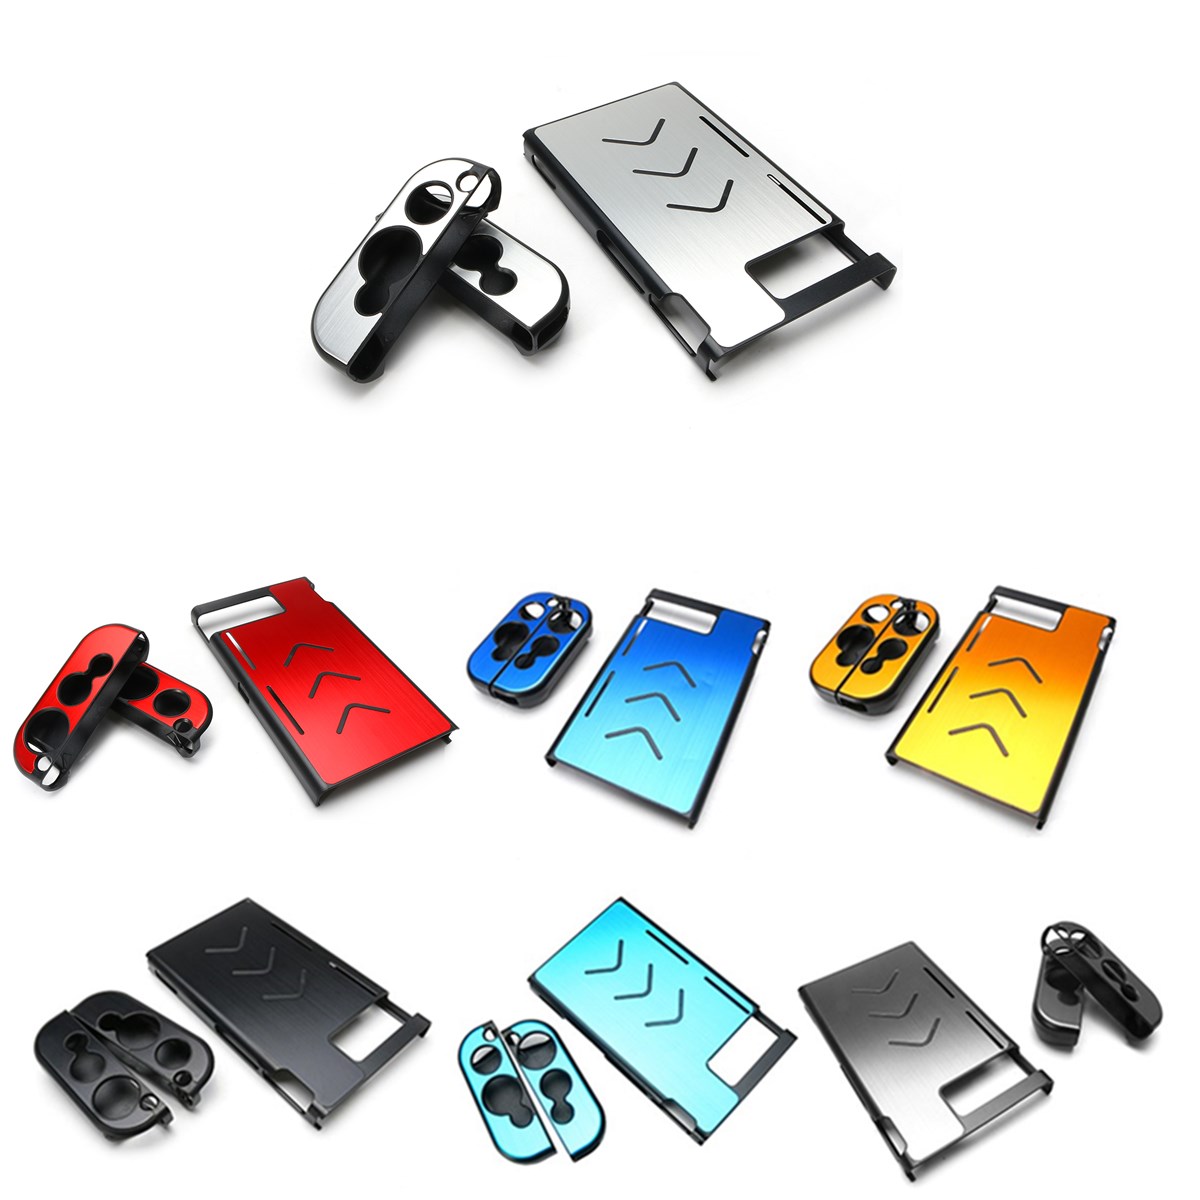 Replacement Accessories Housing Shell Case Protective For Nintendo Switch Controller Joy-con